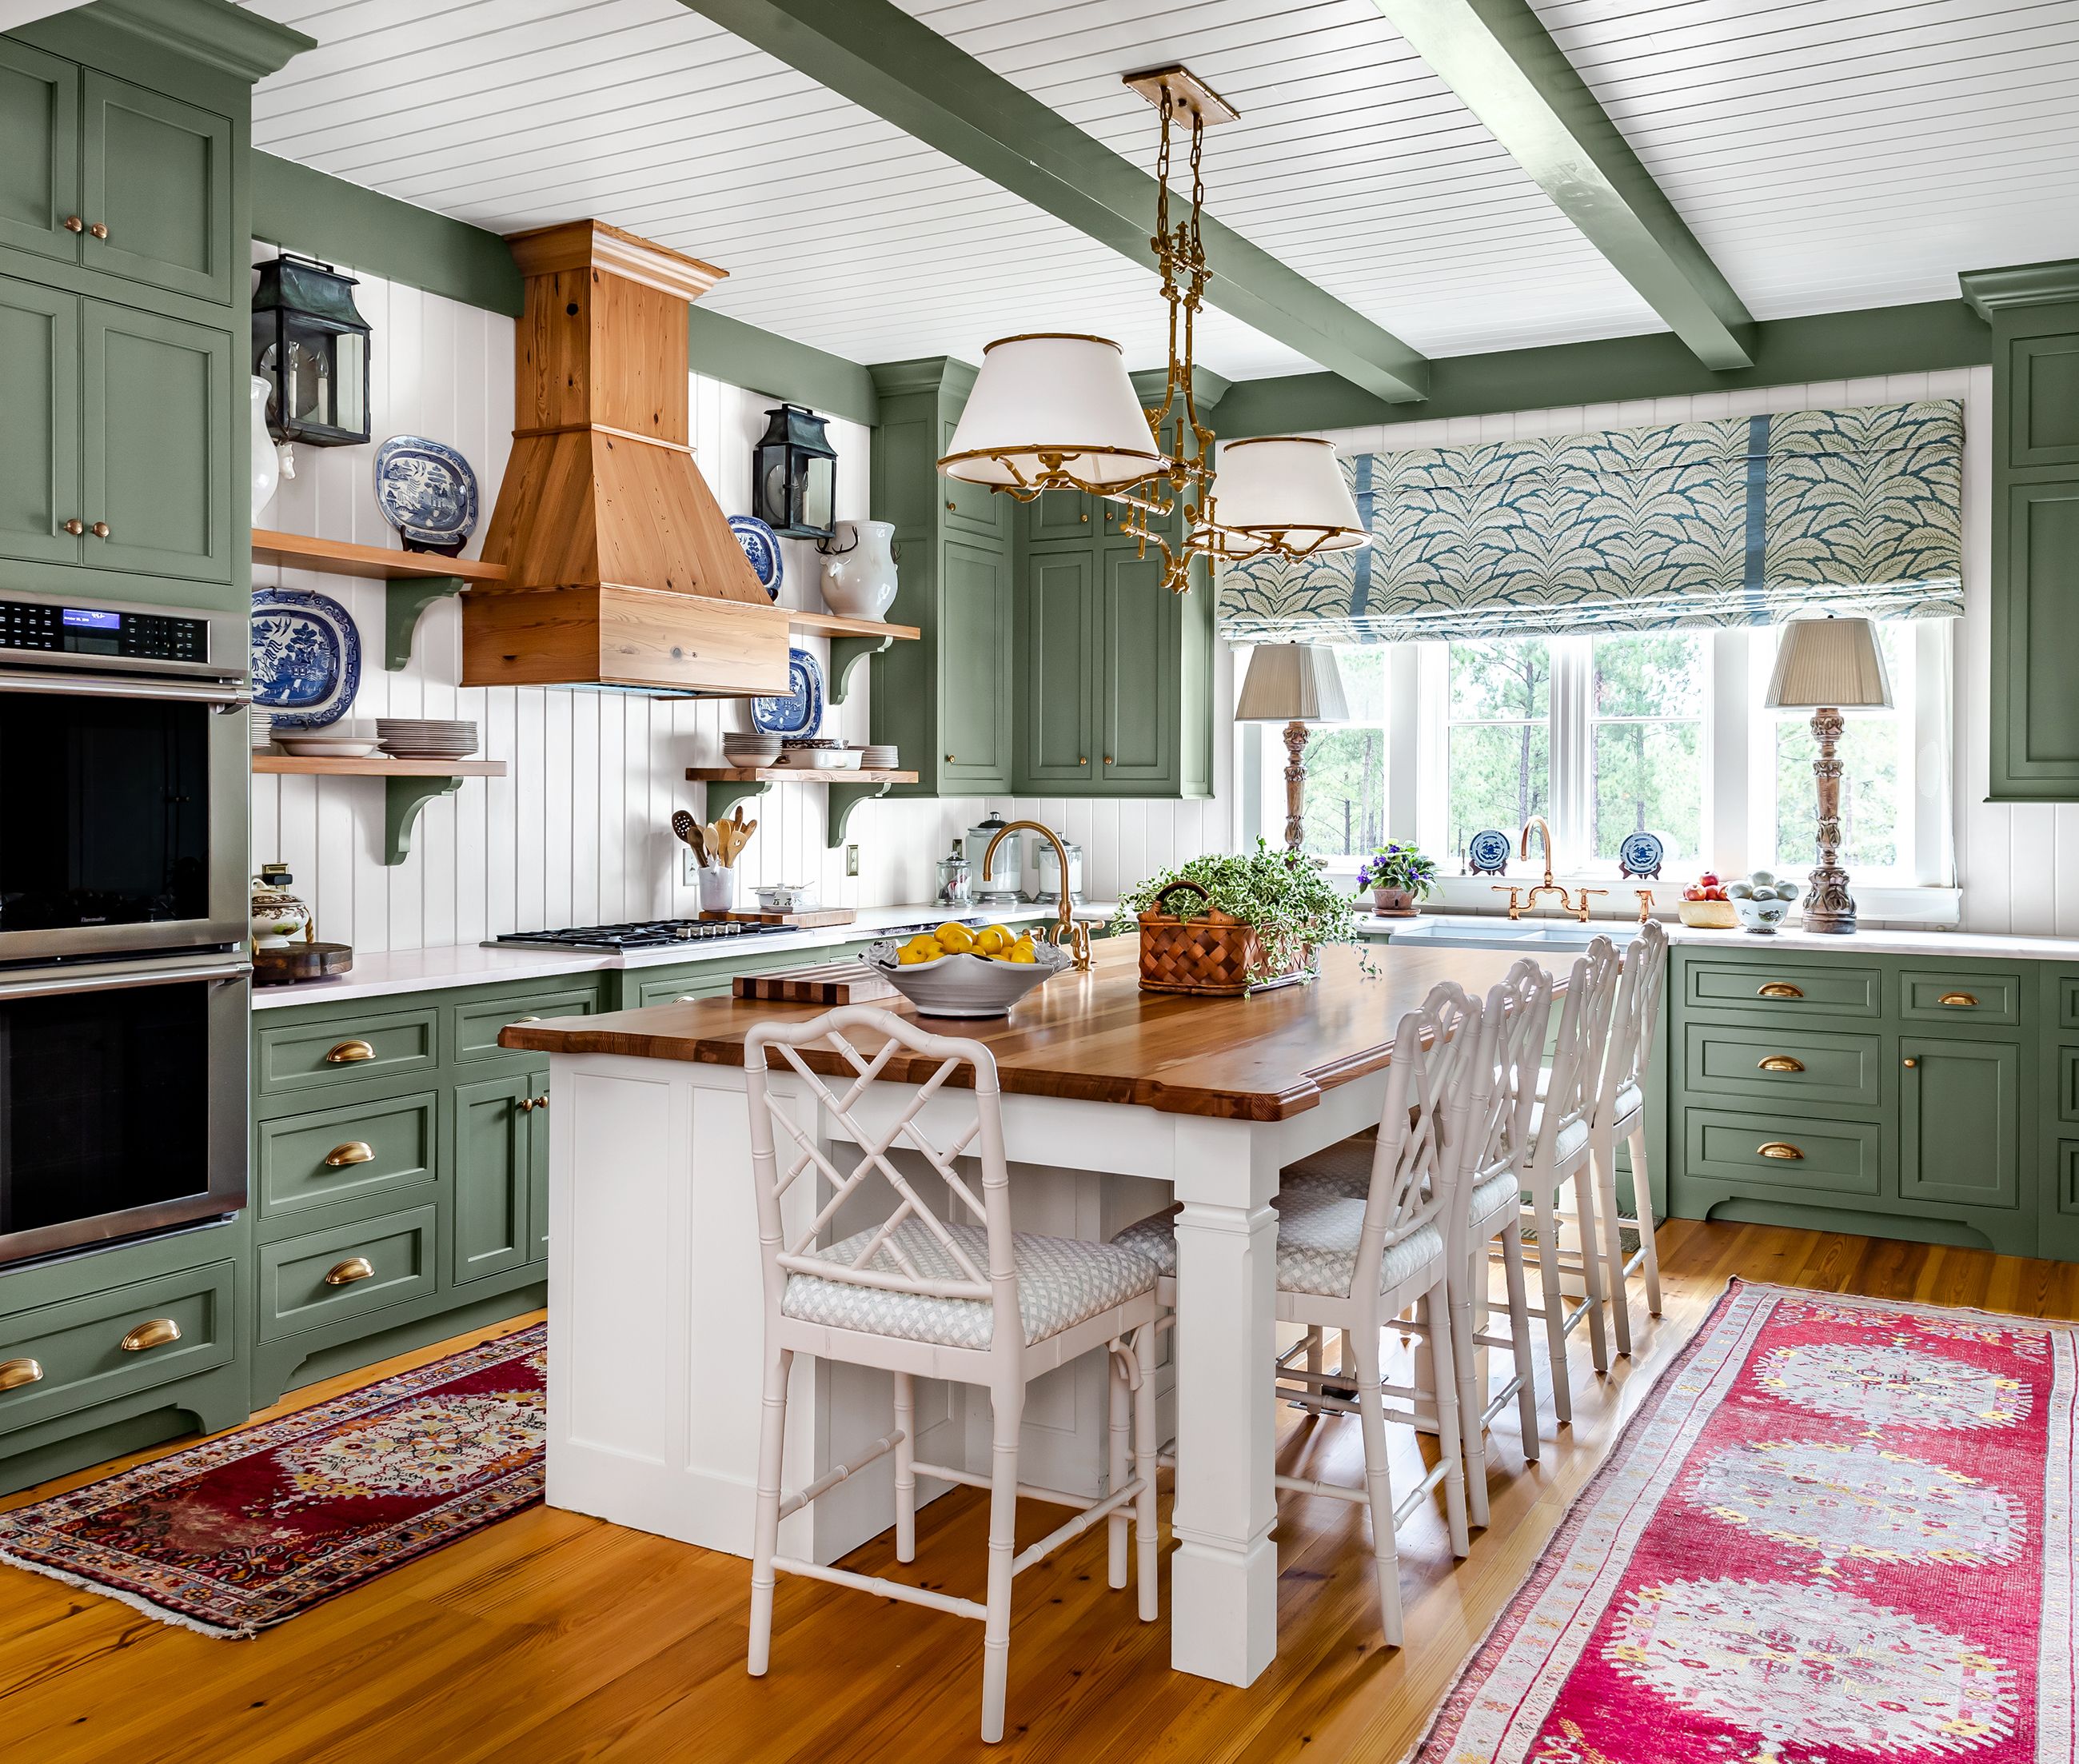 Kitchen Decorating Ideas With Mint Green Walls new york 2021